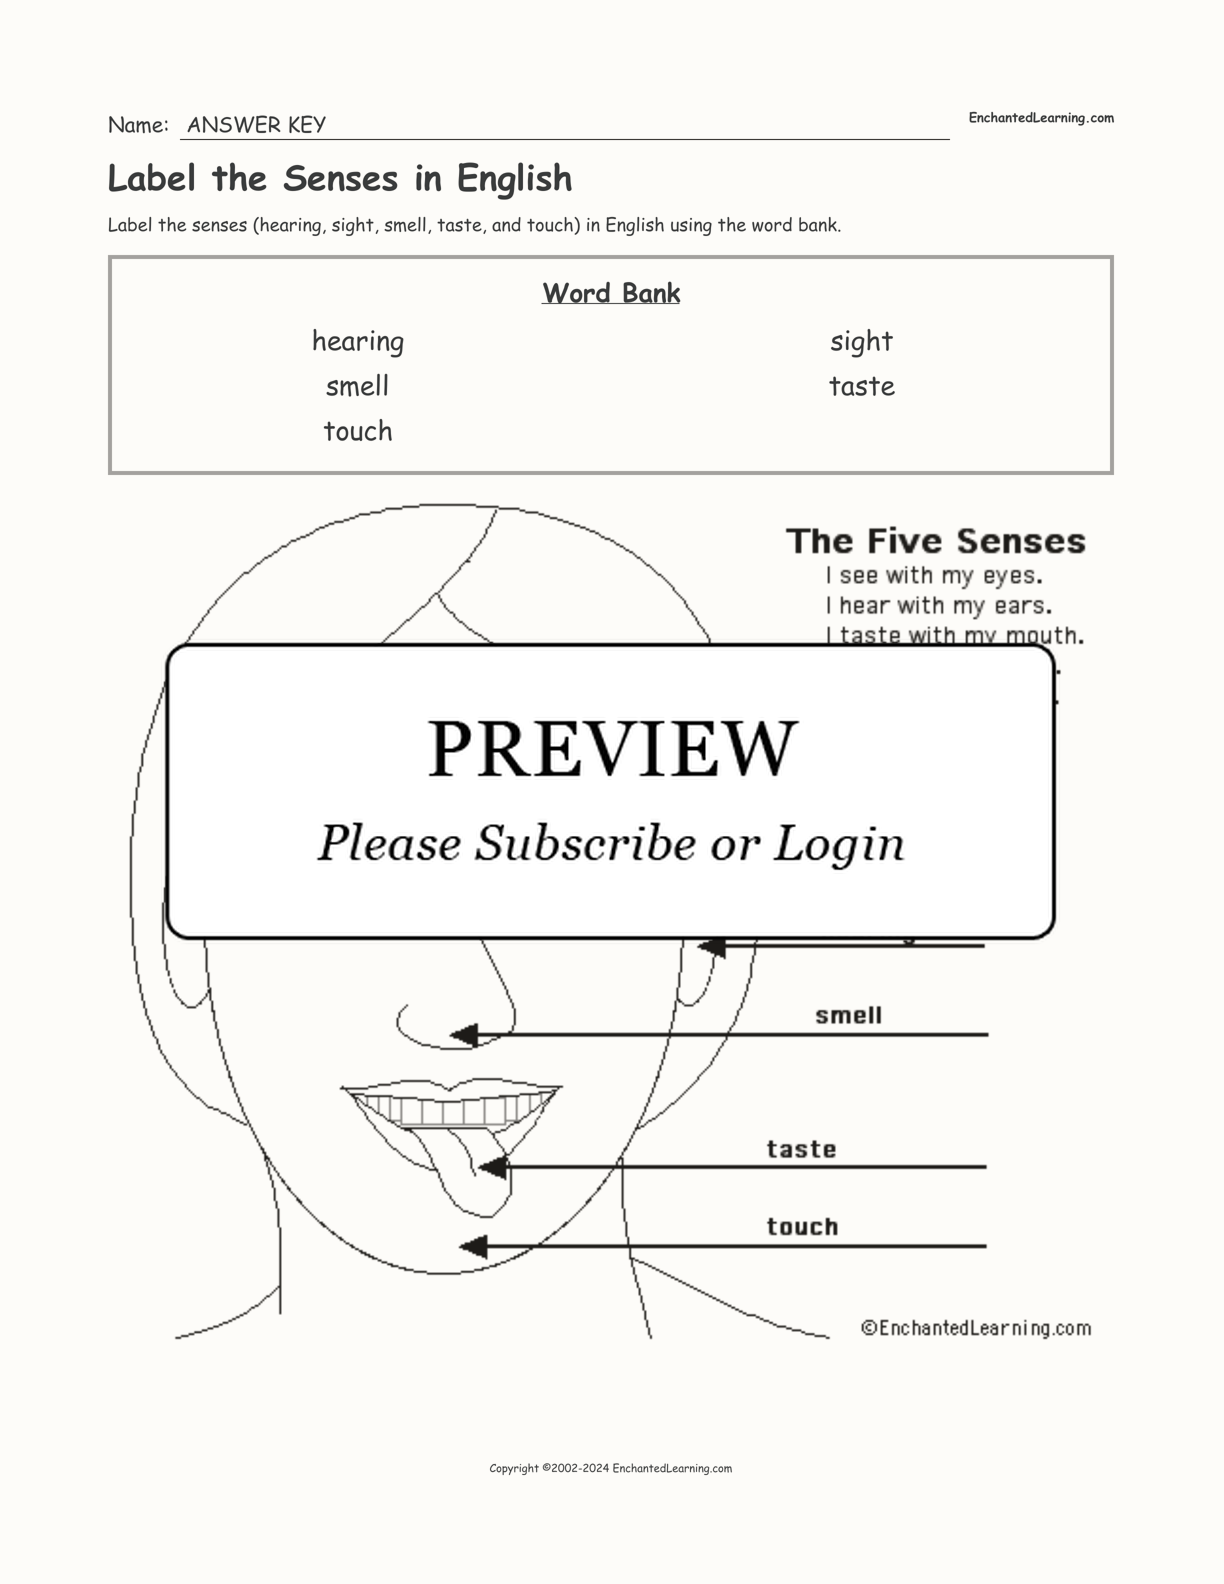 Label the Senses in English interactive worksheet page 2